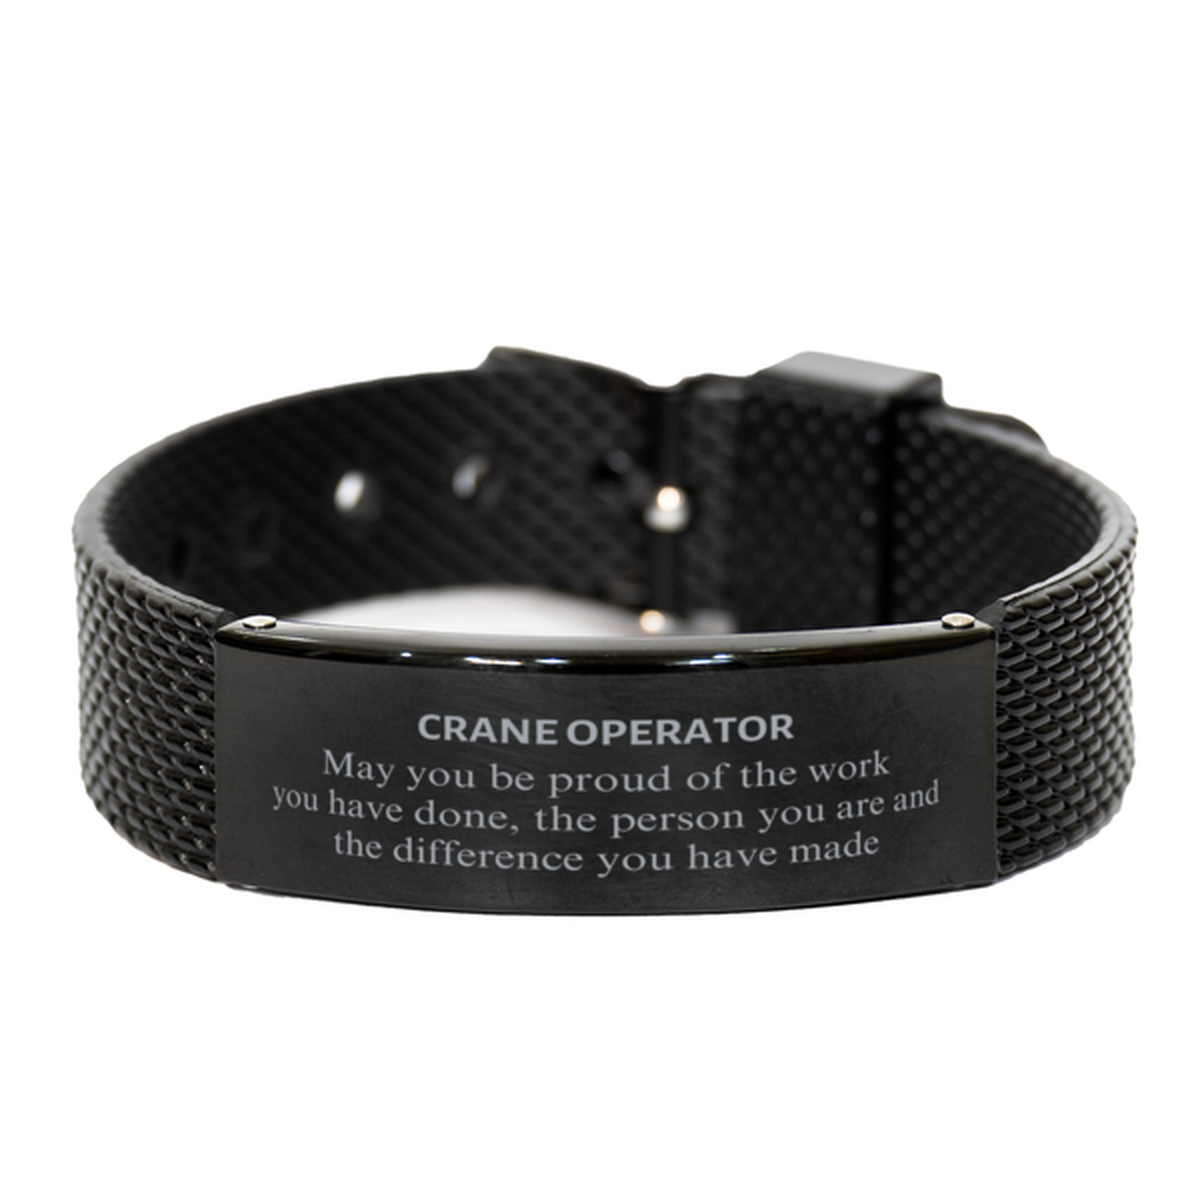 Crane Operator May you be proud of the work you have done, Retirement Crane Operator Black Shark Mesh Bracelet for Colleague Appreciation Gifts Amazing for Crane Operator